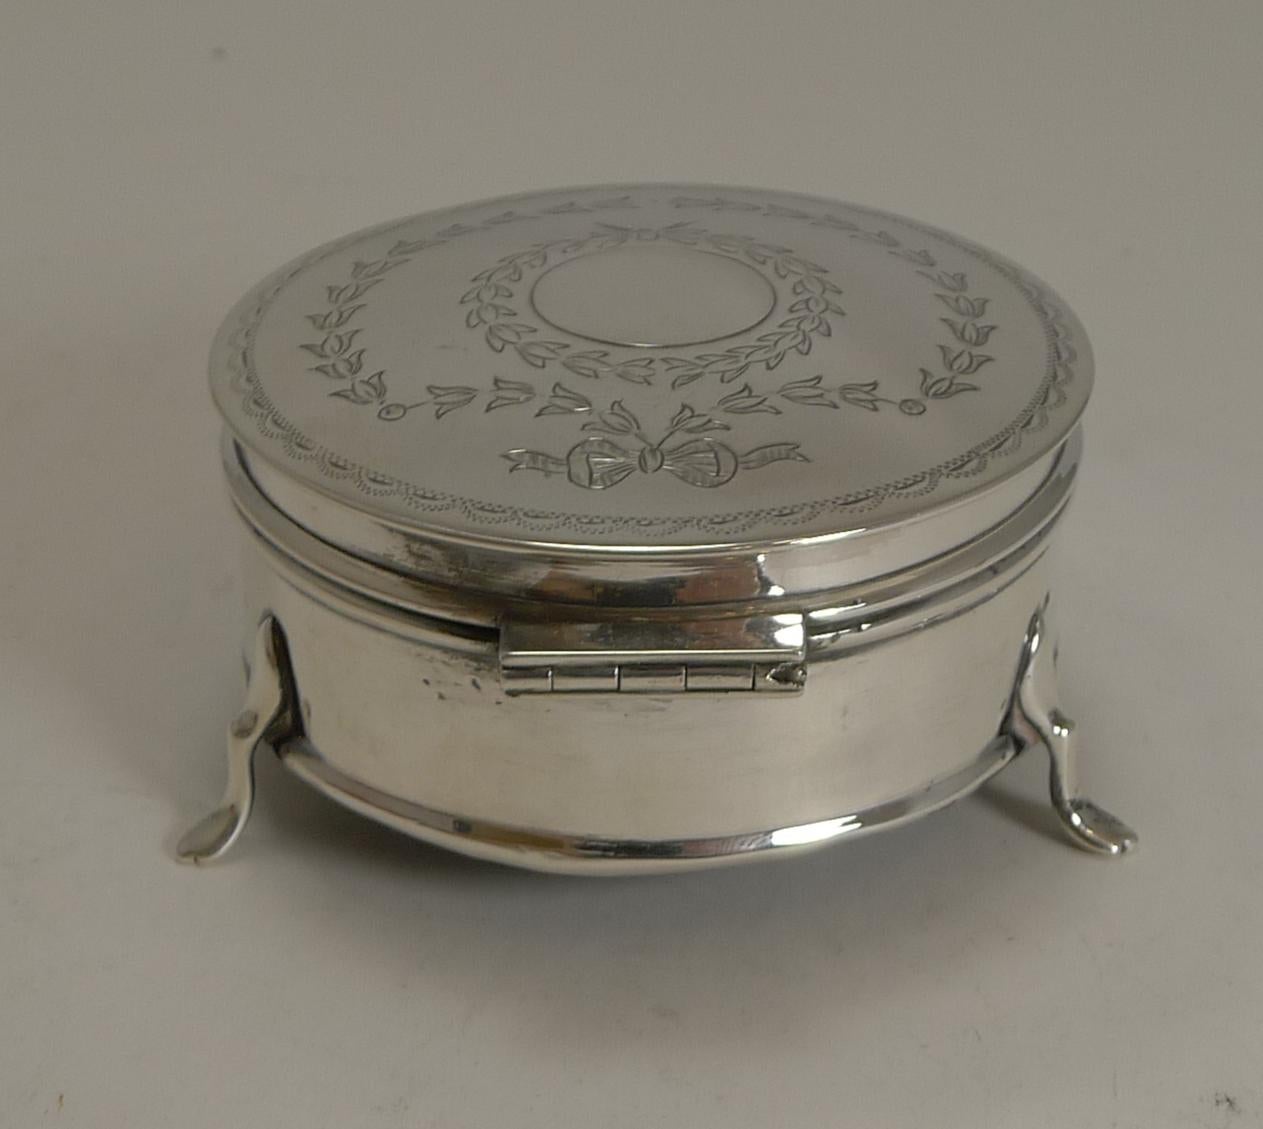 Early 20th Century Pretty Antique English Sterling Silver Jewelry or Ring Box, 1913